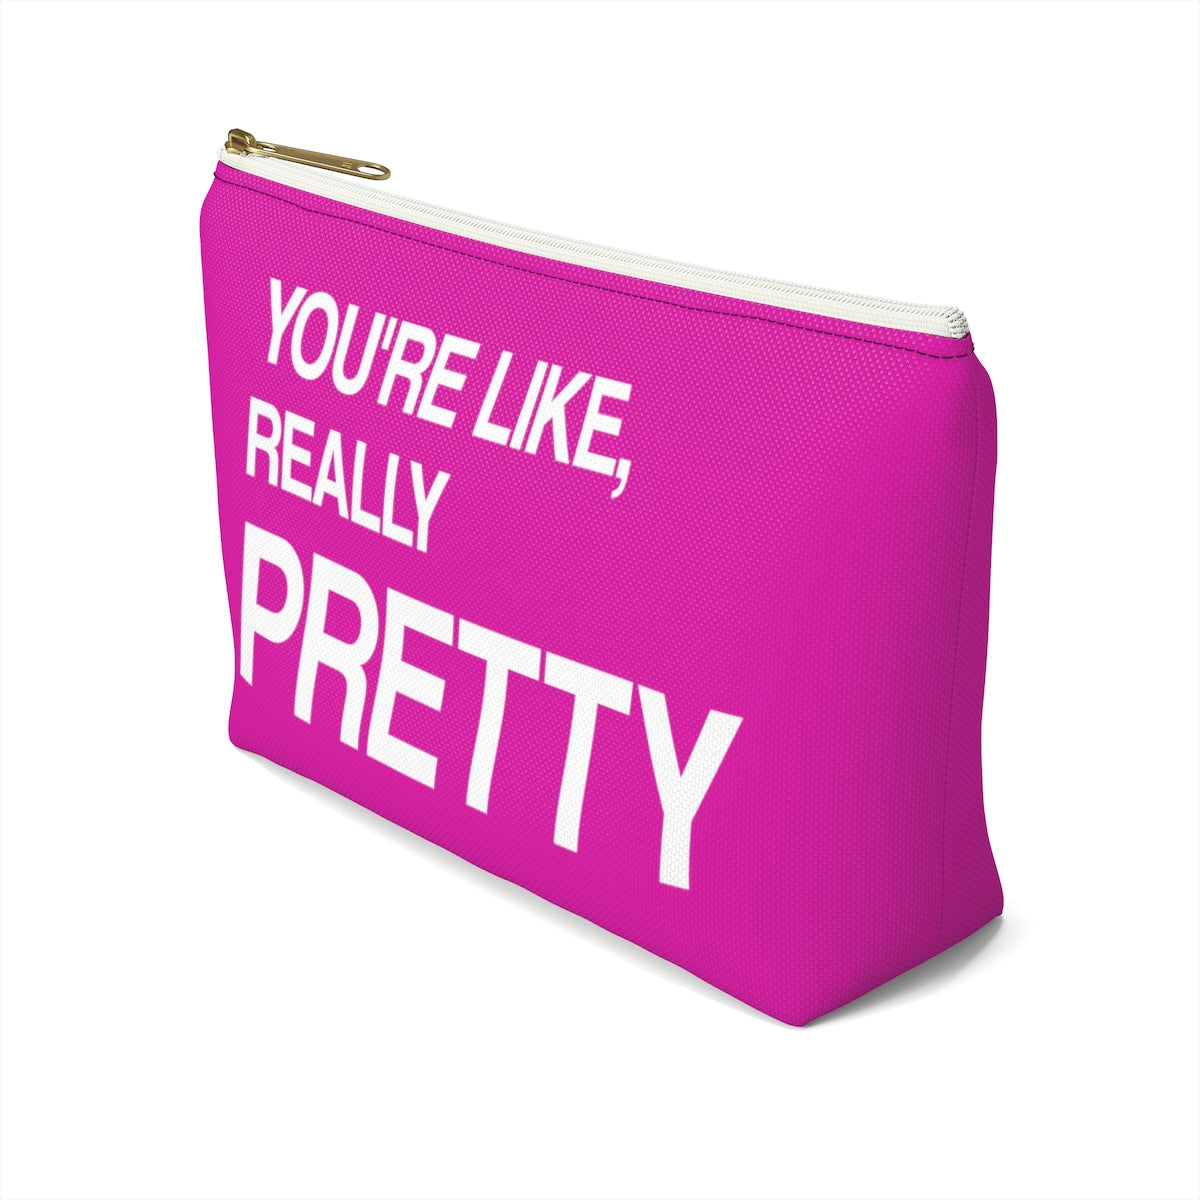 You're Like Really Pretty Make Up Bag, Girls Quote Beauty Bachelorette Cosmetics Gift Her Girlfriend Friend Gift, Accessory Pouch w T-bottom Starcove Fashion